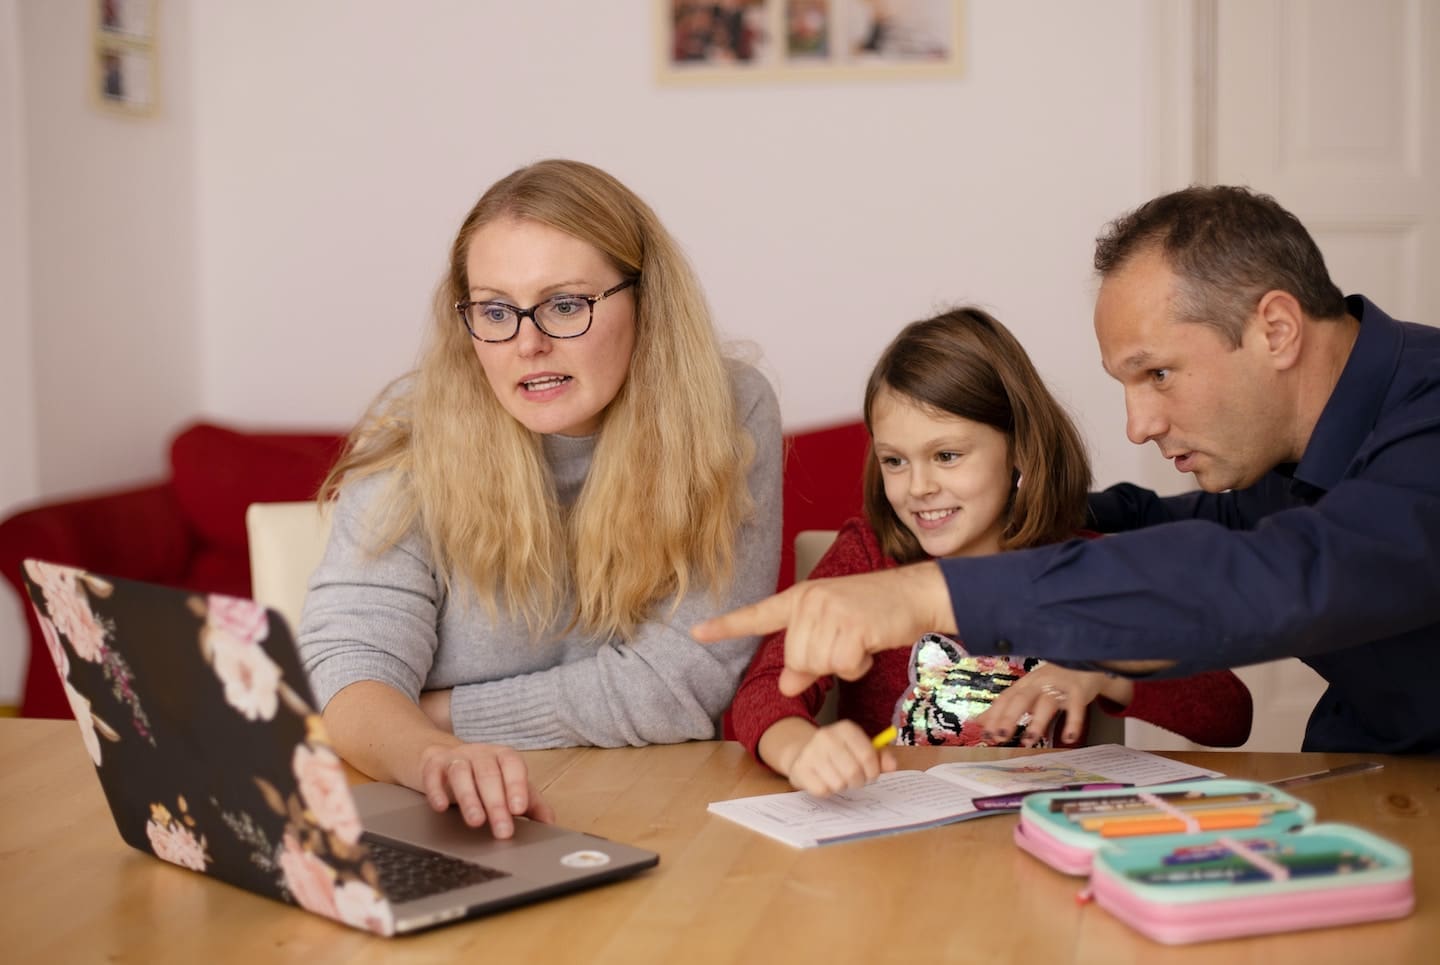 Families rely on fast internet access that 5G promises.(Sofatutor photo from Unsplash)